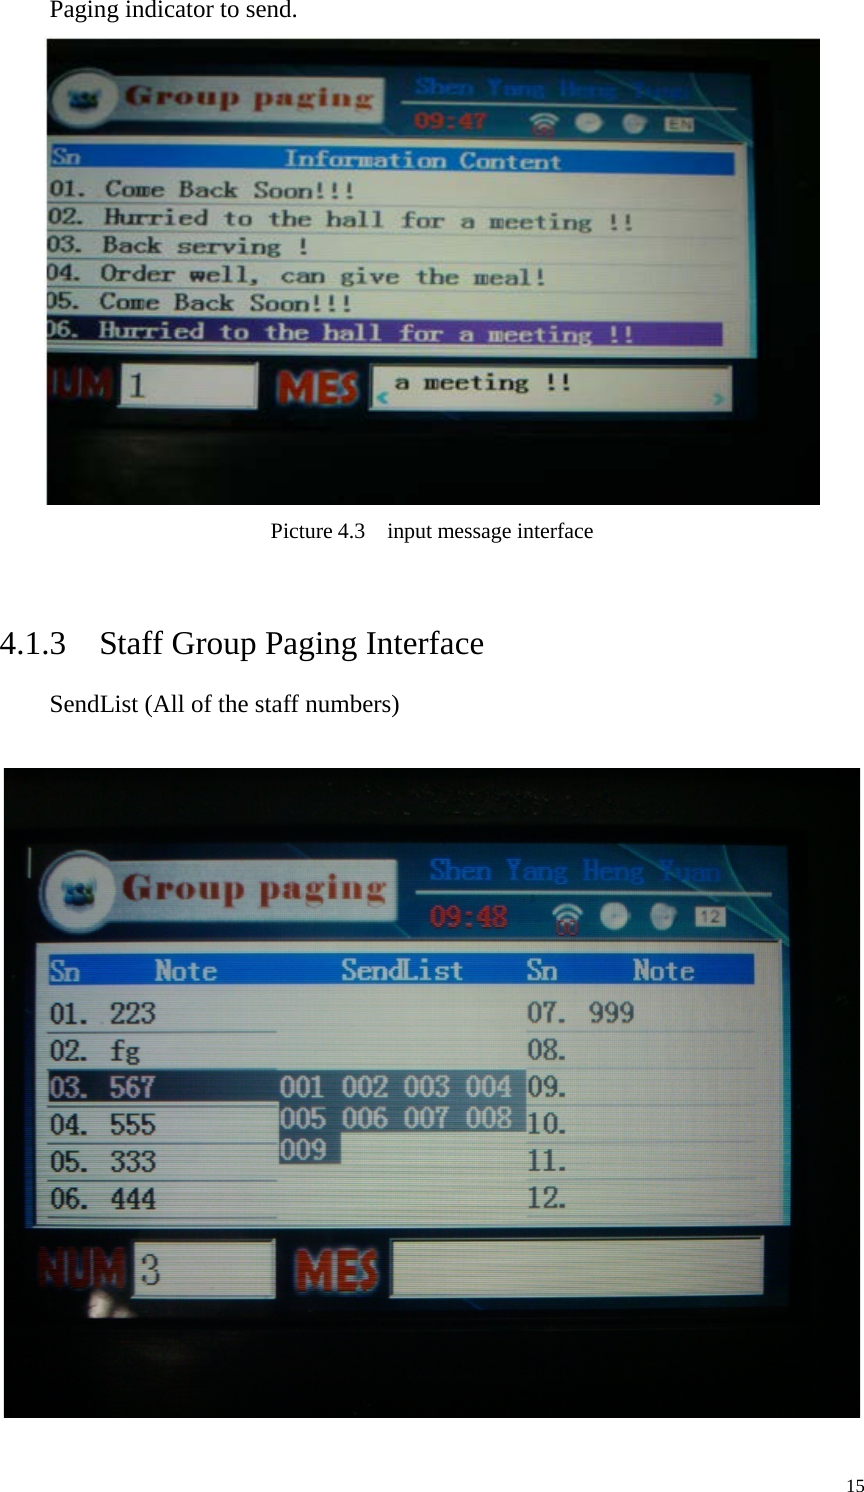   Paging indicator to send.    Picture 4.3  input message interface  4.1.3  Staff Group Paging Interface SendList (All of the staff numbers)       15 